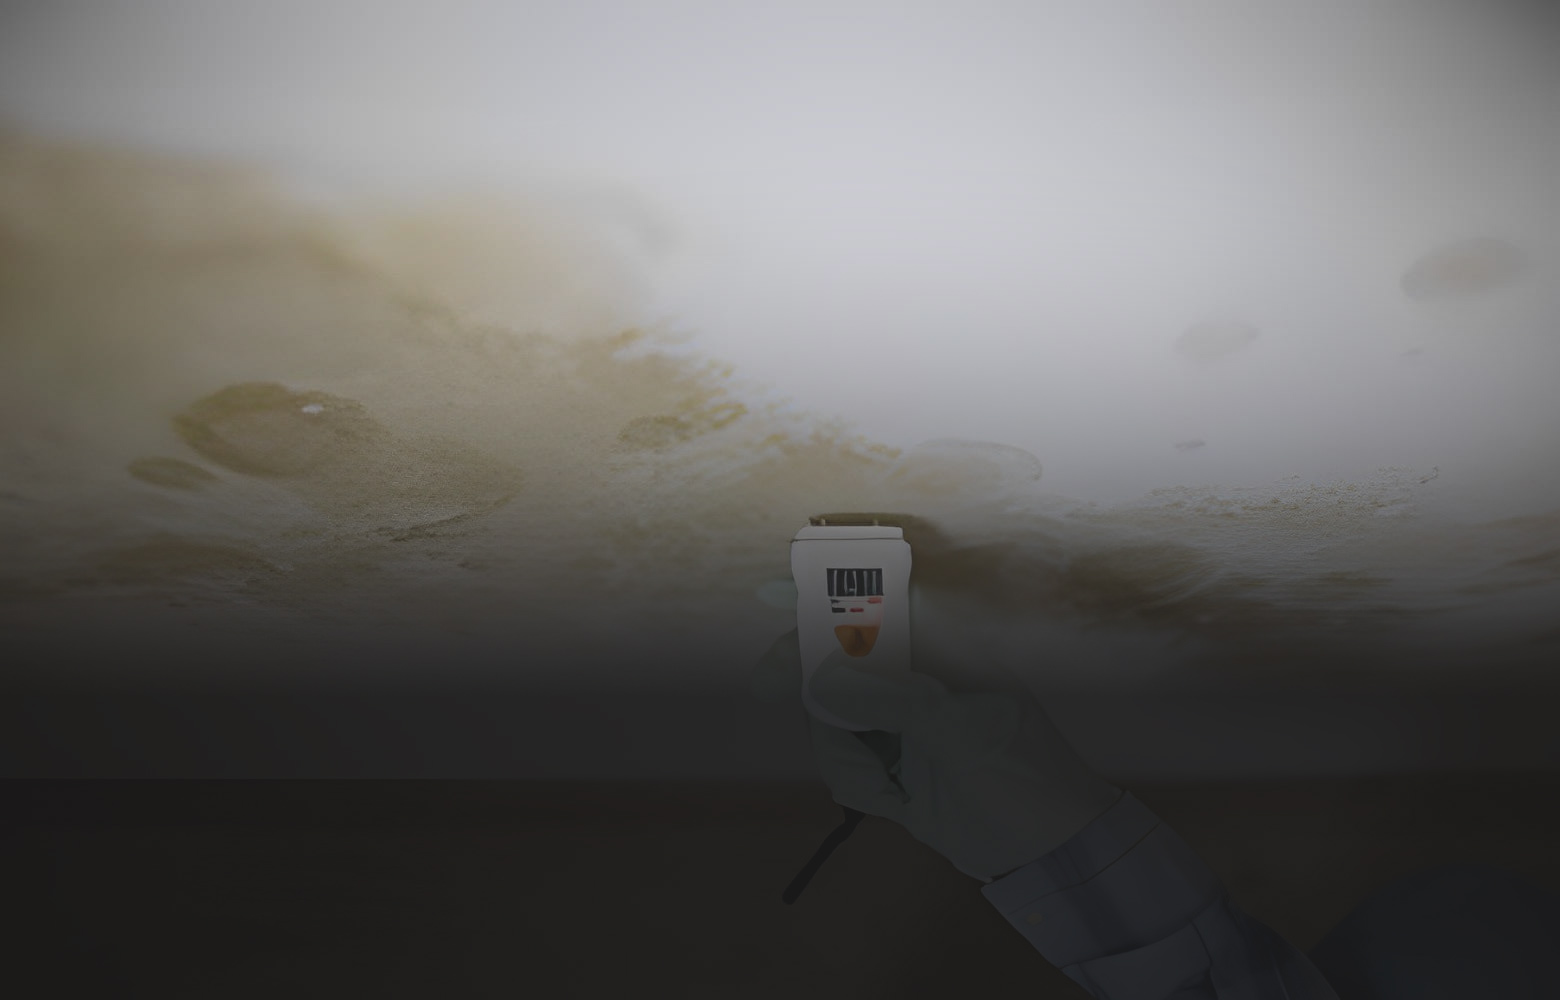 Checking for moisture after mold growth